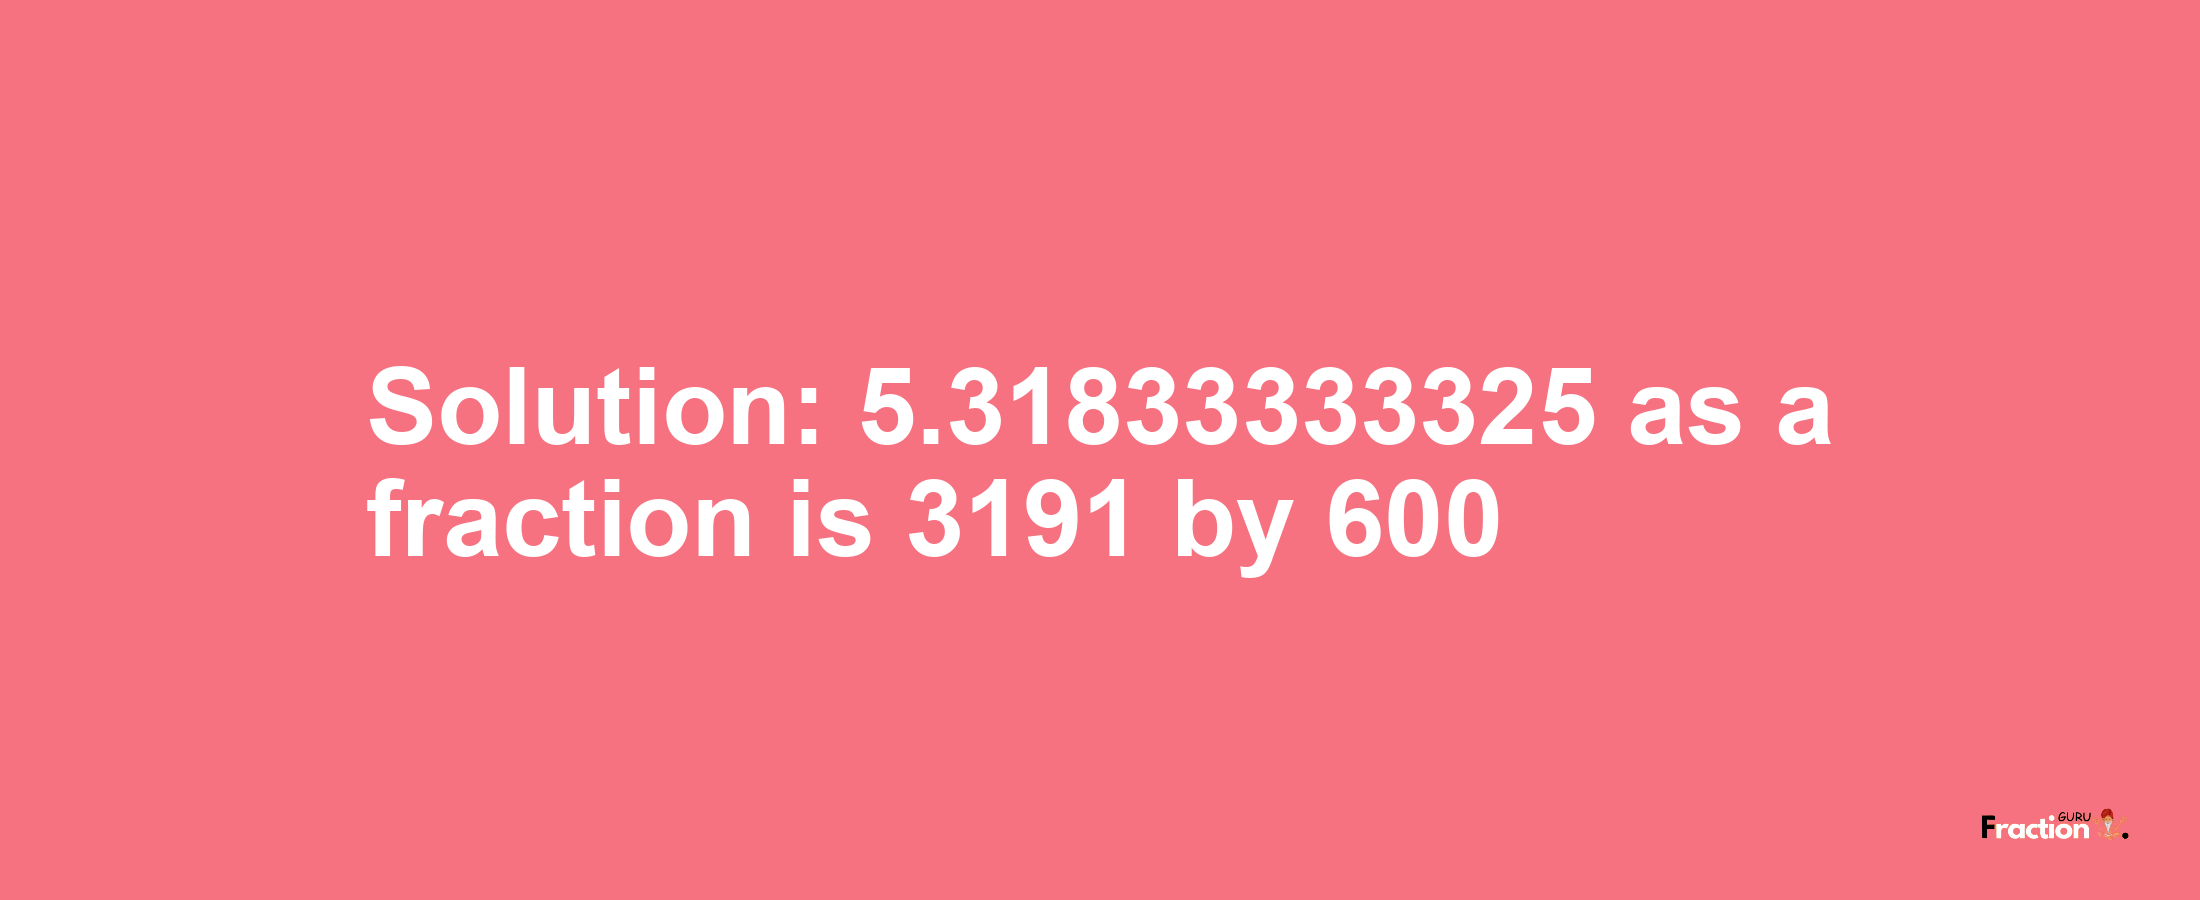 Solution:5.31833333325 as a fraction is 3191/600